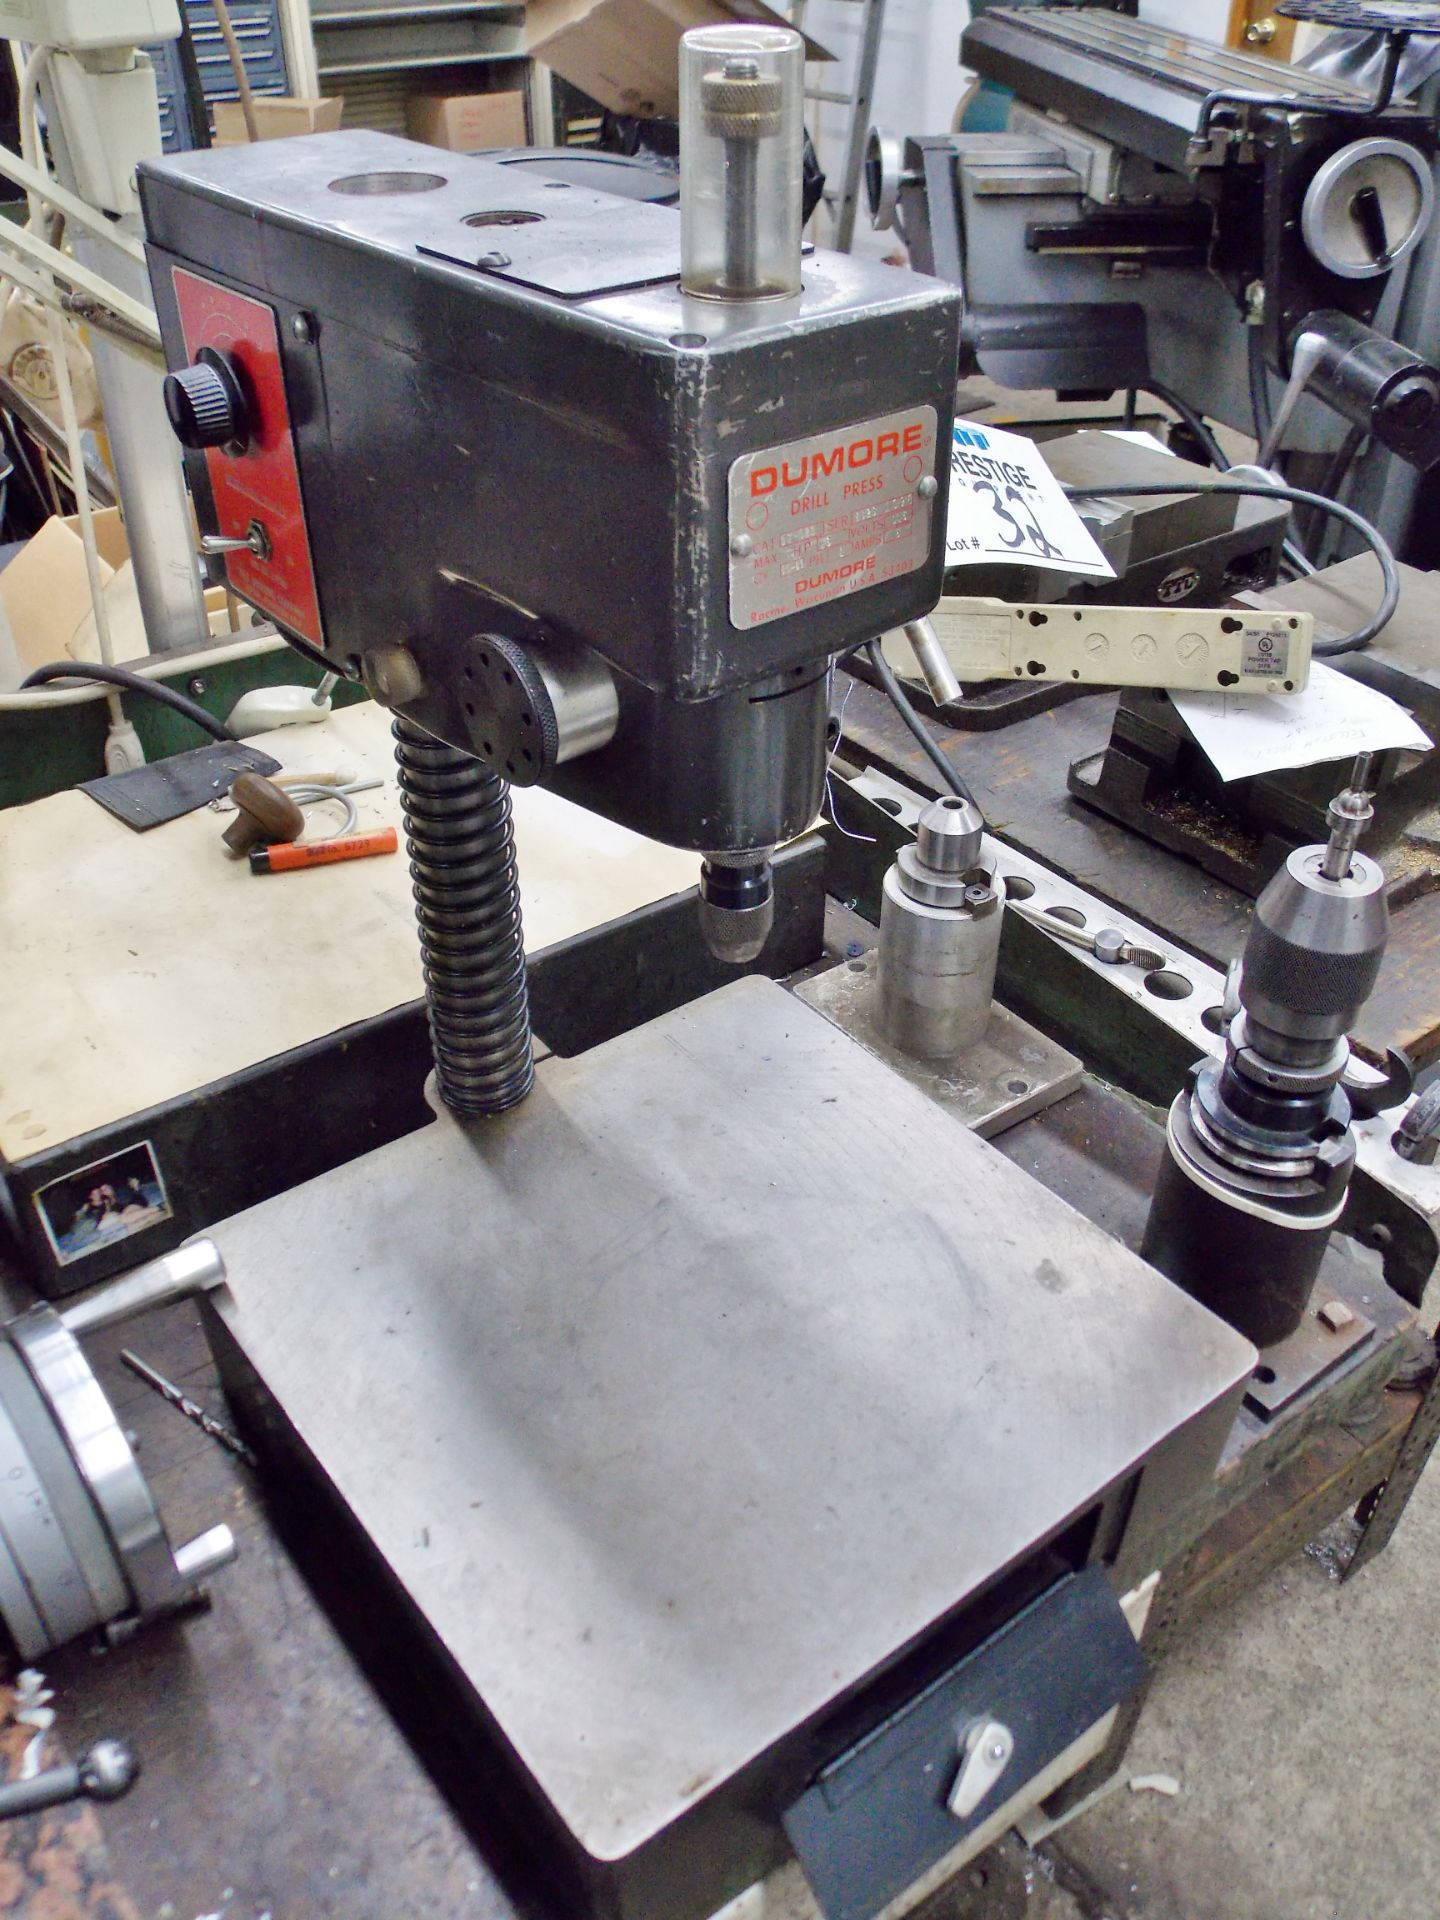 DUMORE 37-021 12" Bench Drill Press - Image 2 of 2